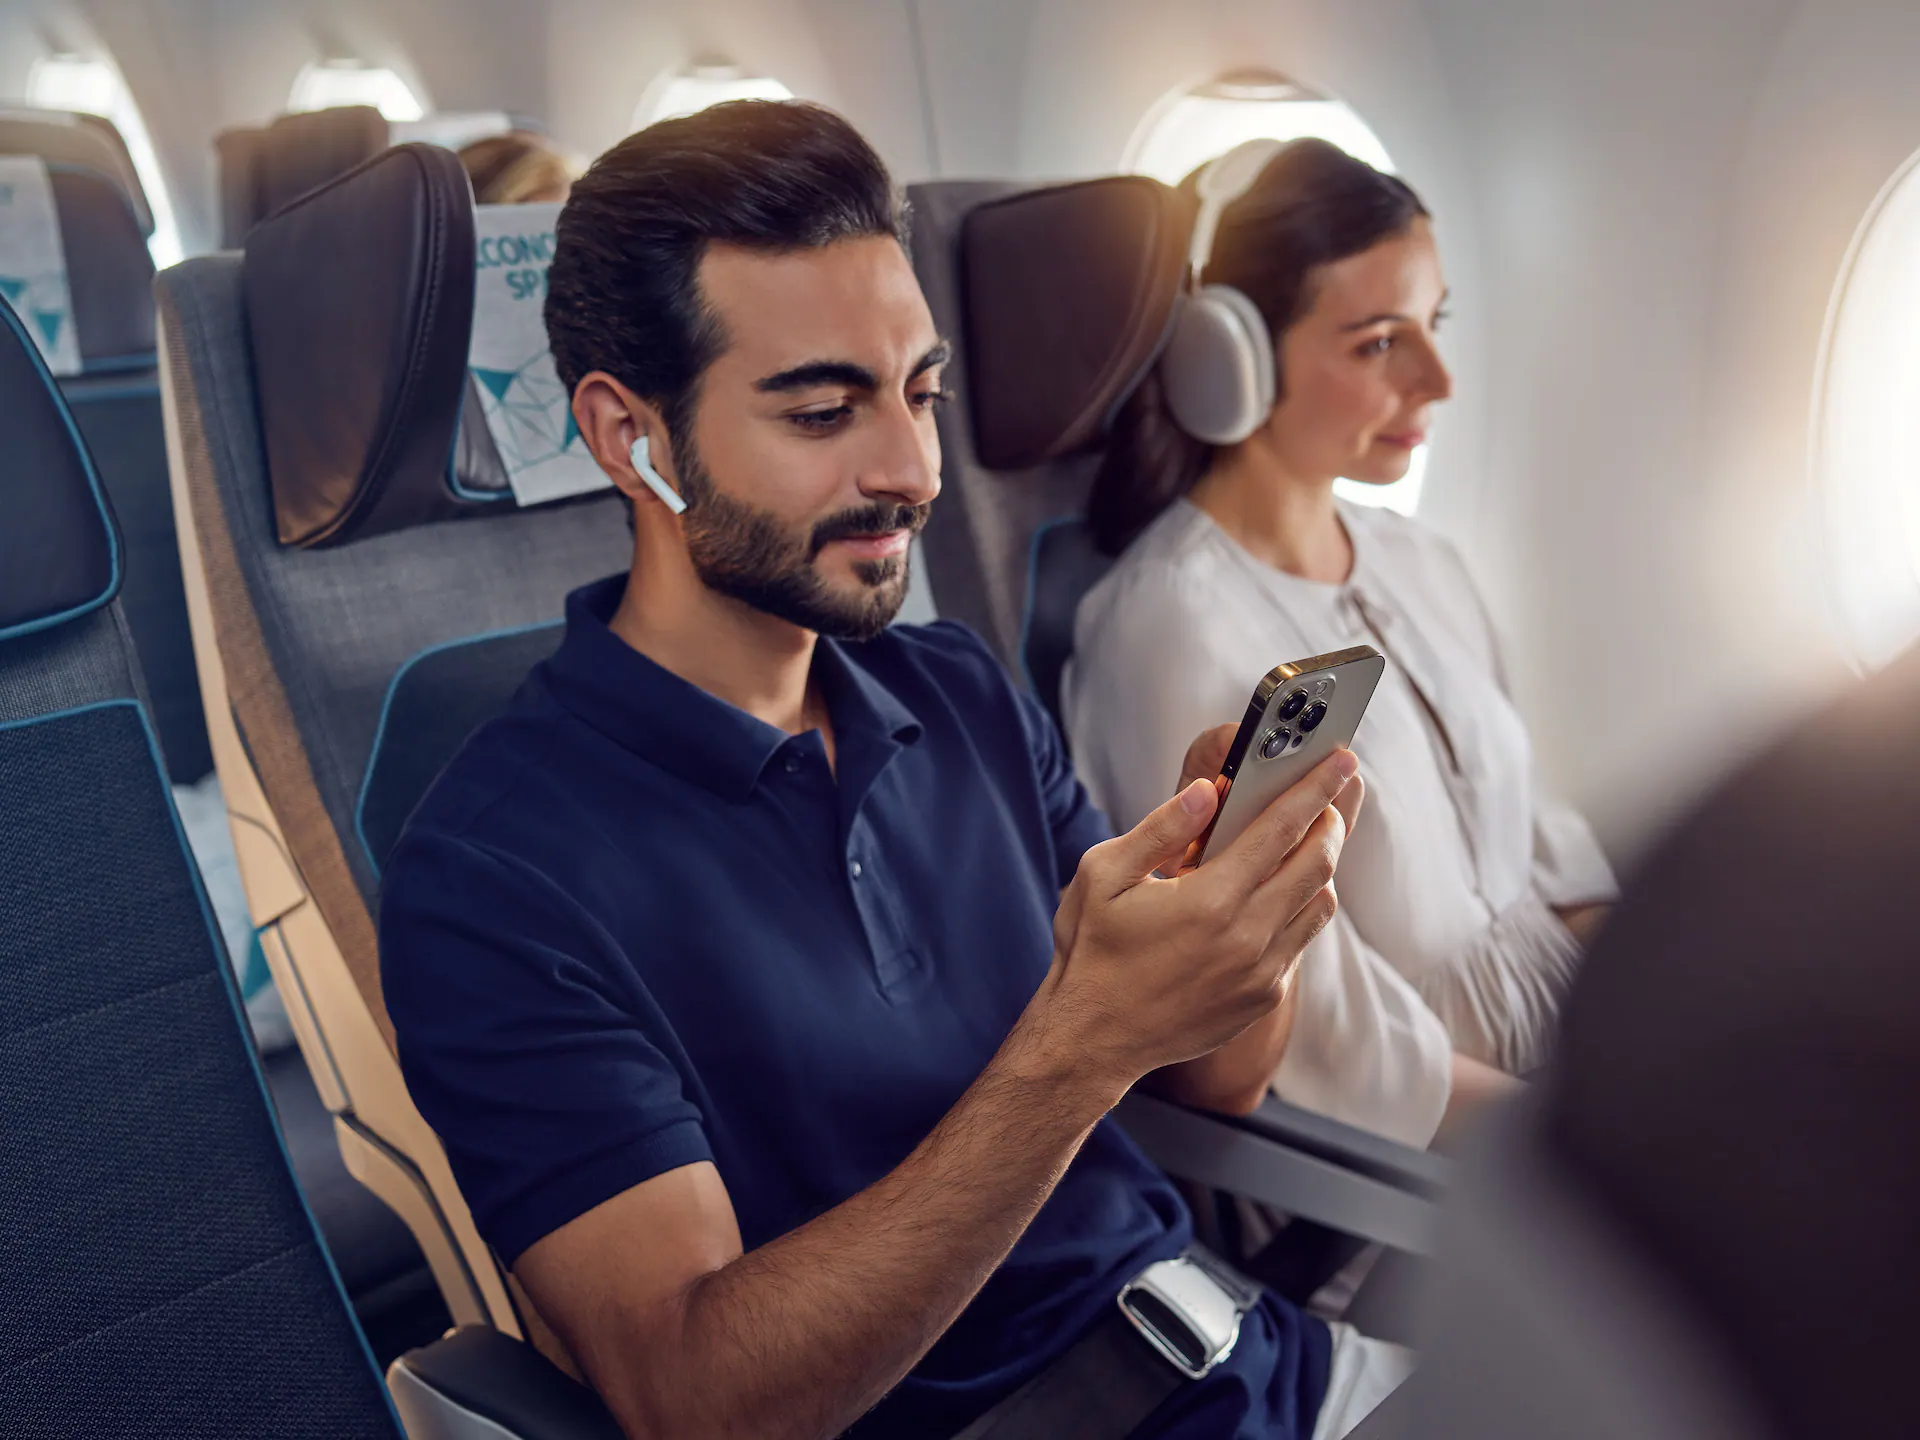 Etihad launches Wi-Fly with free chat and unlimited data